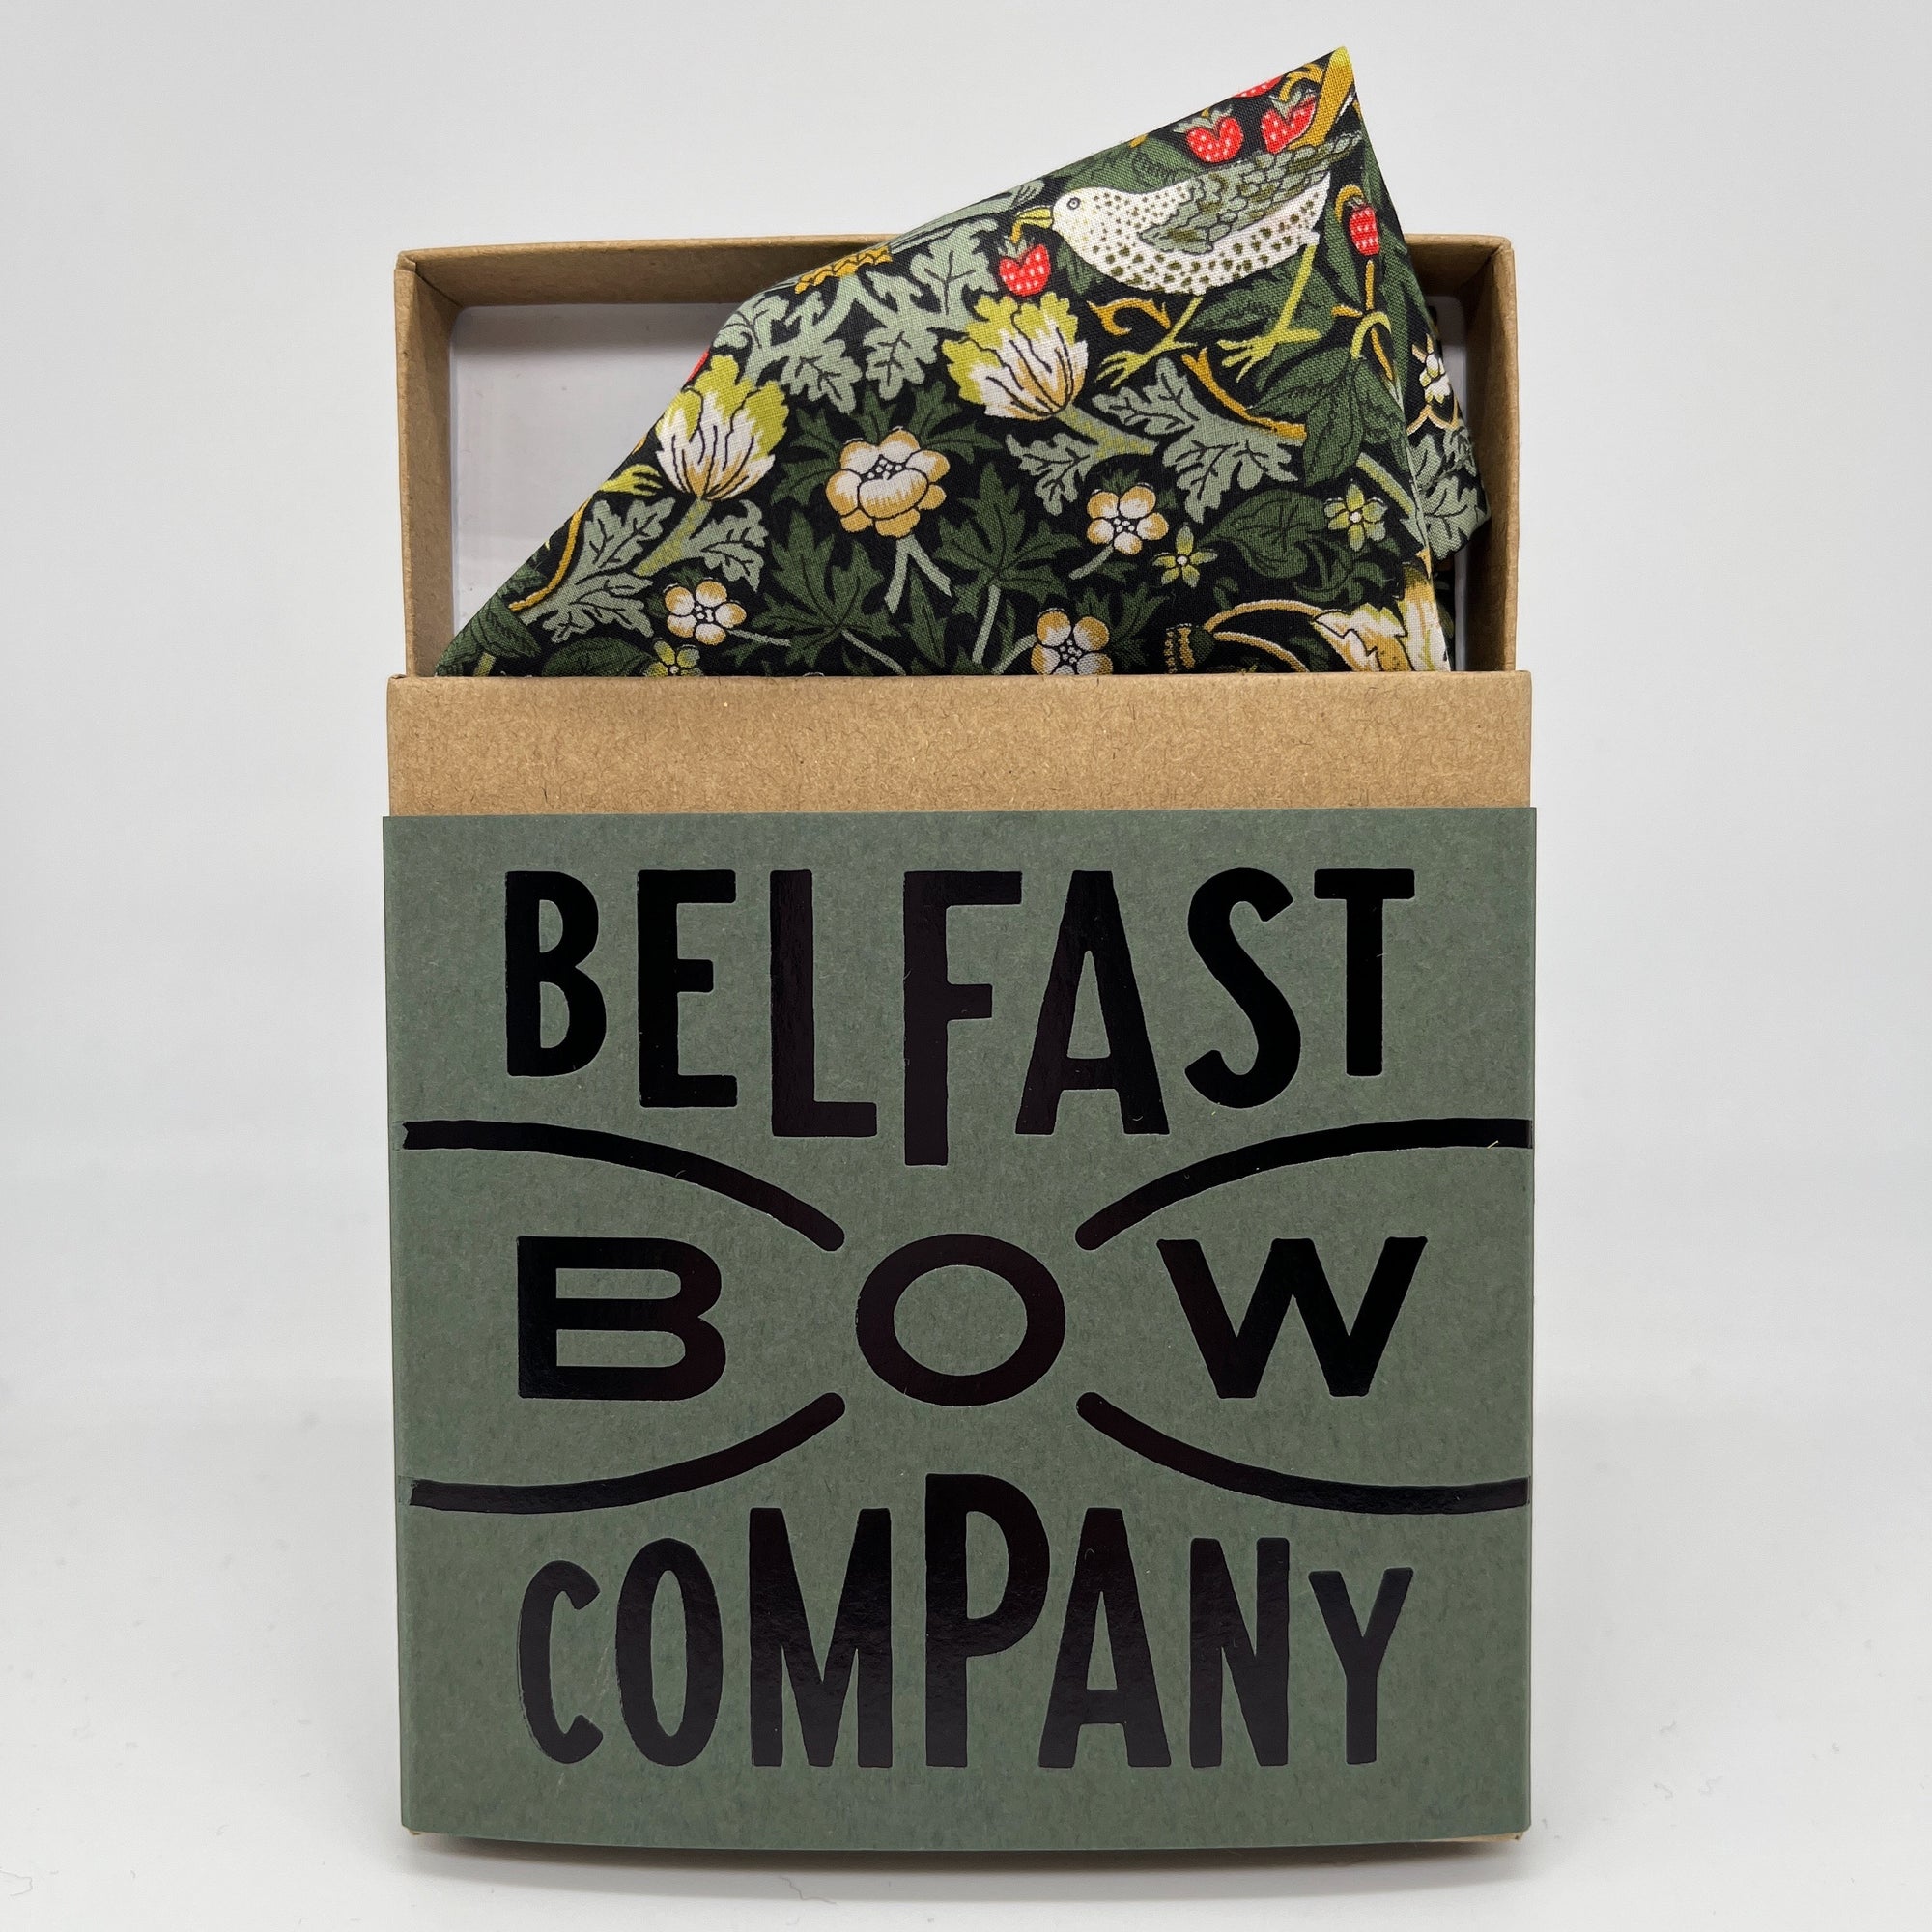 Liberty of London Pocket Square in Dark Green Strawberry Thief by the Belfast Bow Company